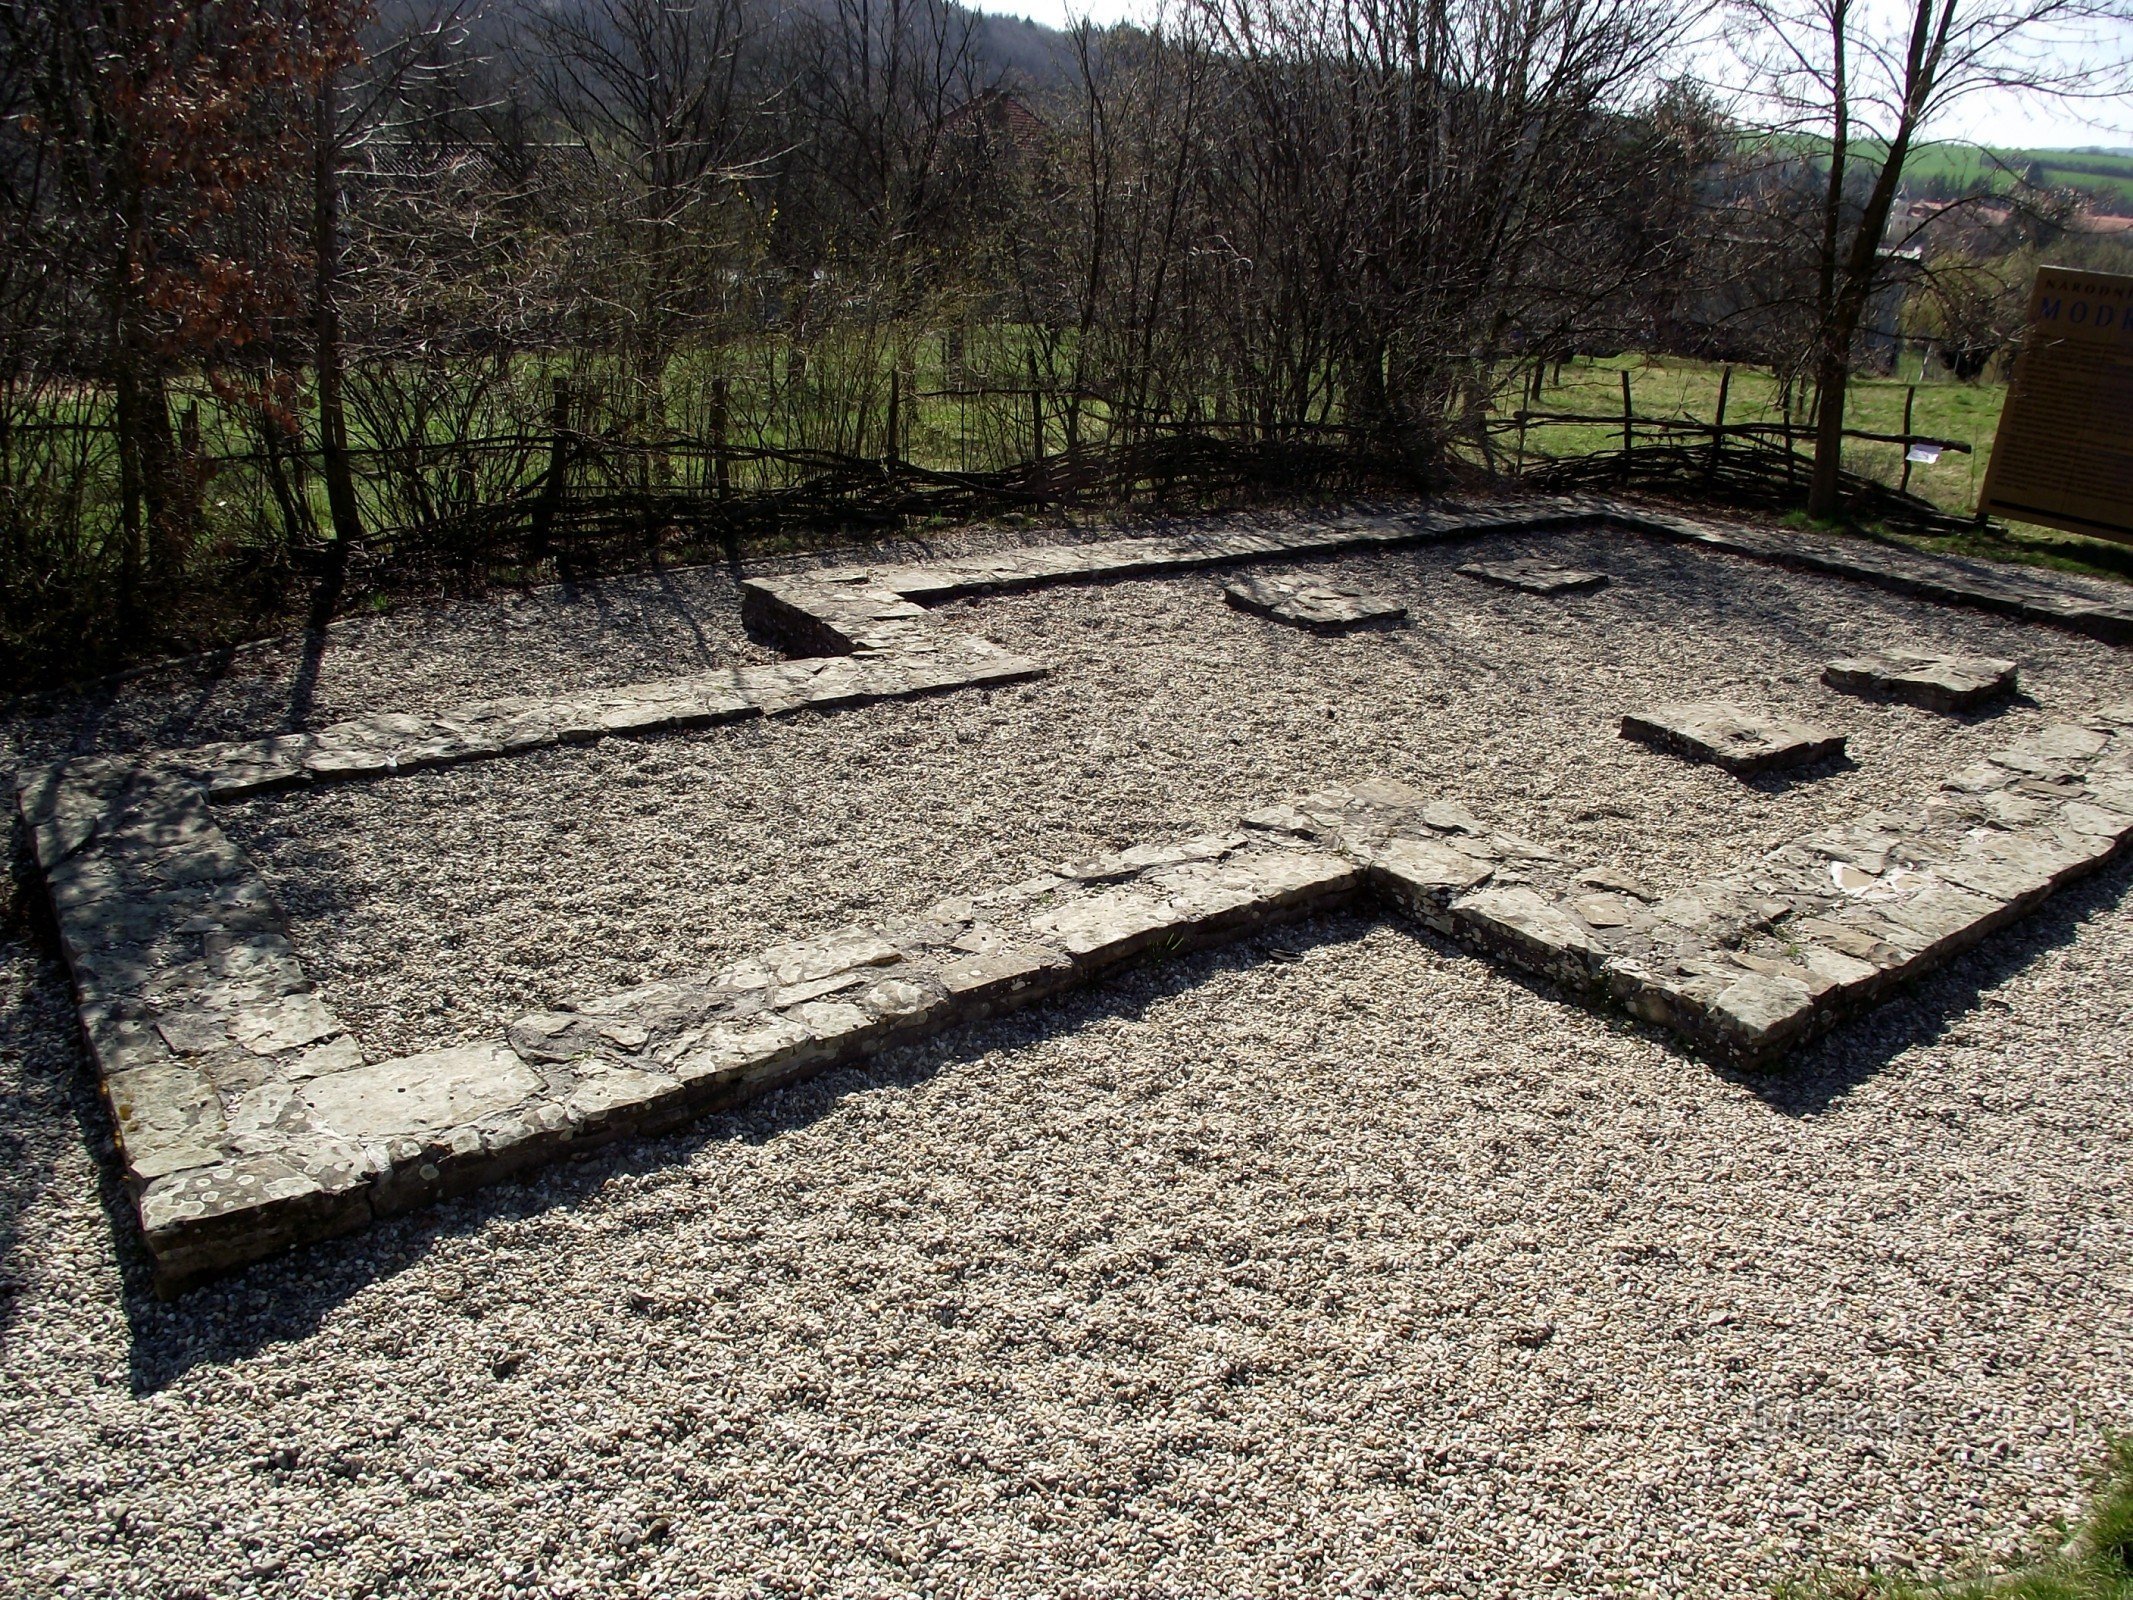 the foundations of the original building